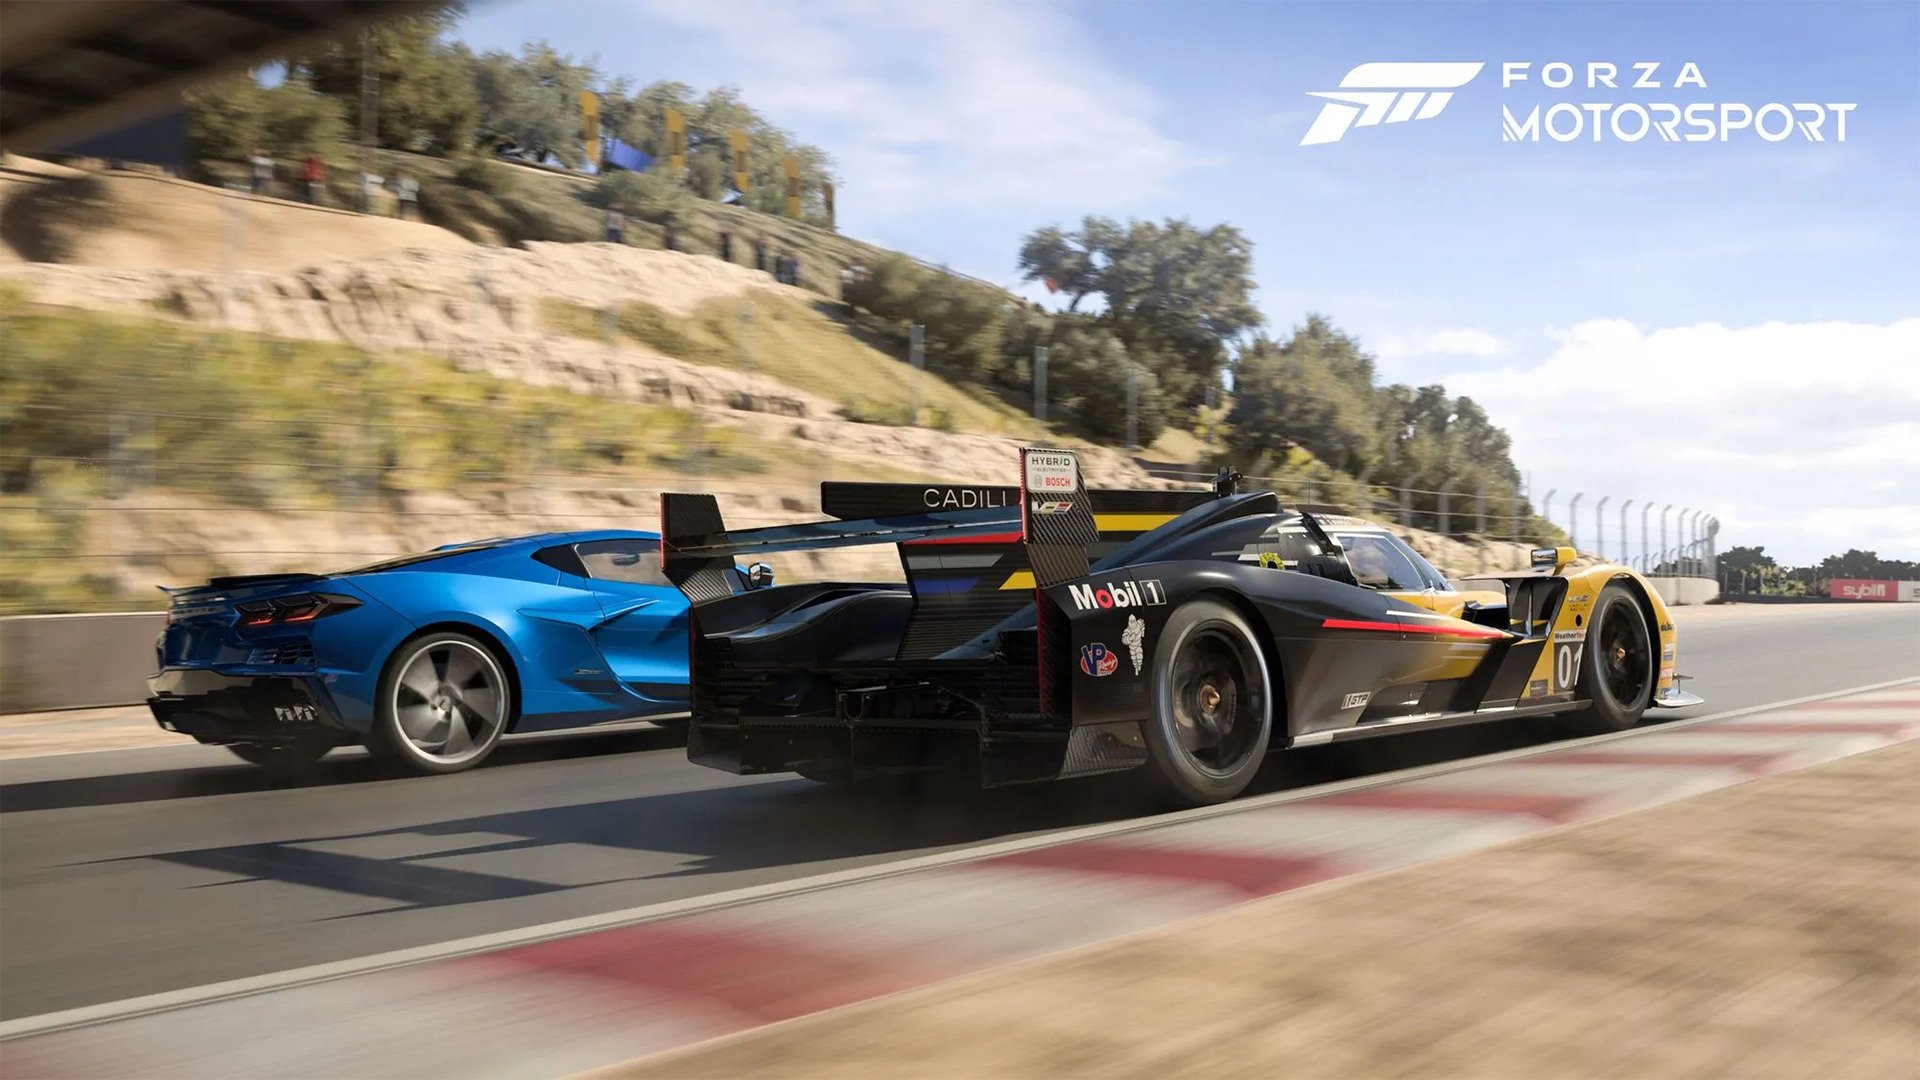 Forza Motorsport's career mode mixes familiarity with weird choices -  Polygon